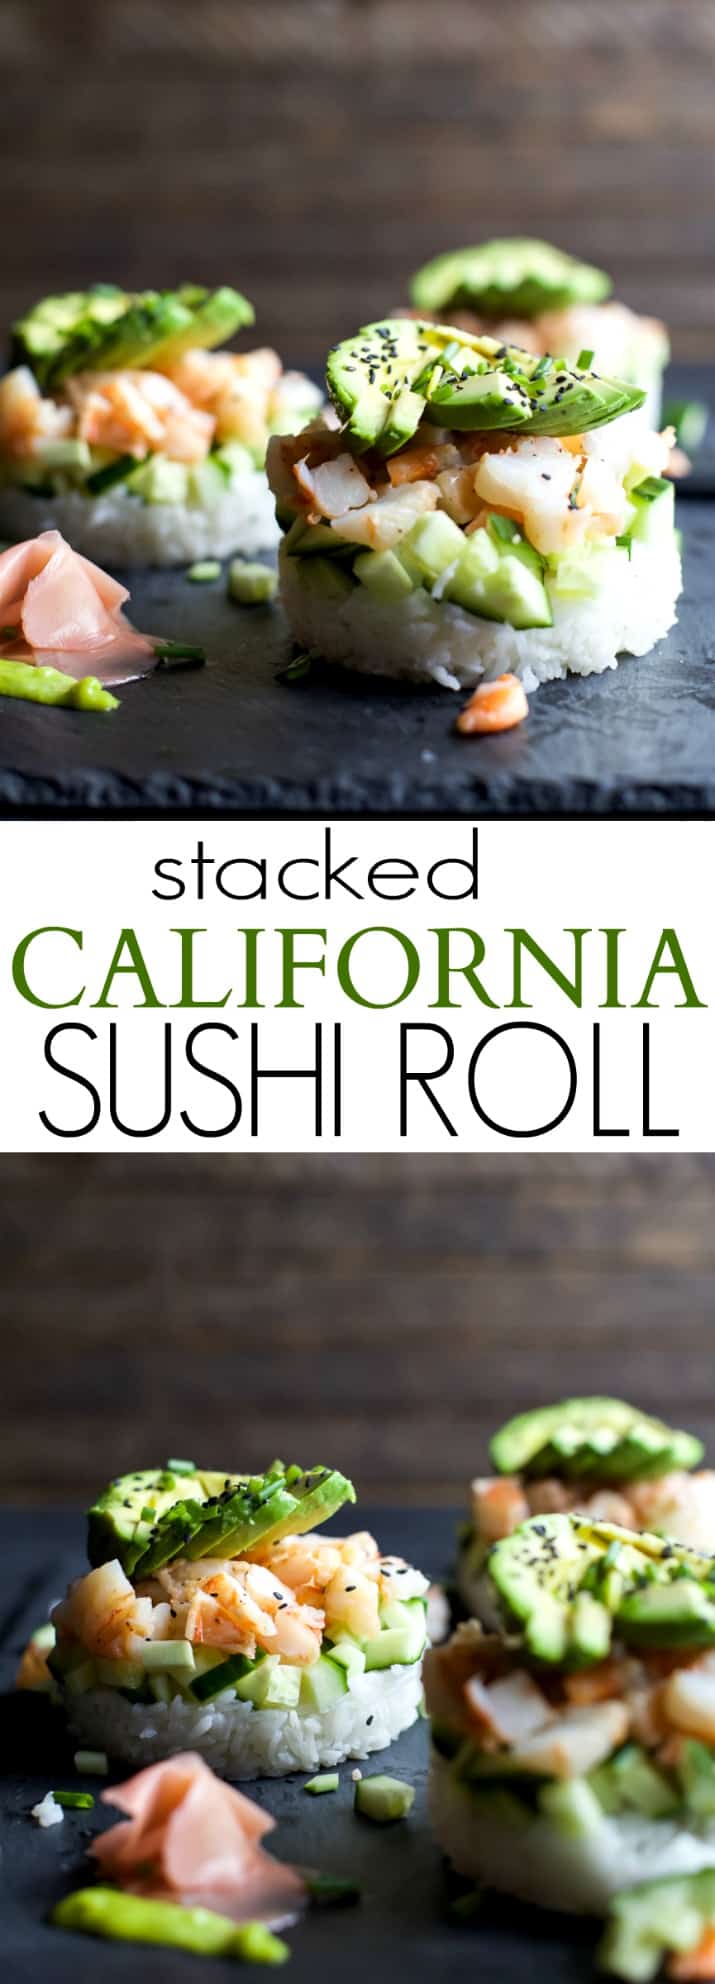 In the mood for Sushi but don't have the time? Problem solved with this easy healthy Stacked California Sushi Roll filled with shrimp, fresh cucumbers, and avocado. Sushi night just got better! | joyfulhealthyeats.com #glutenfree